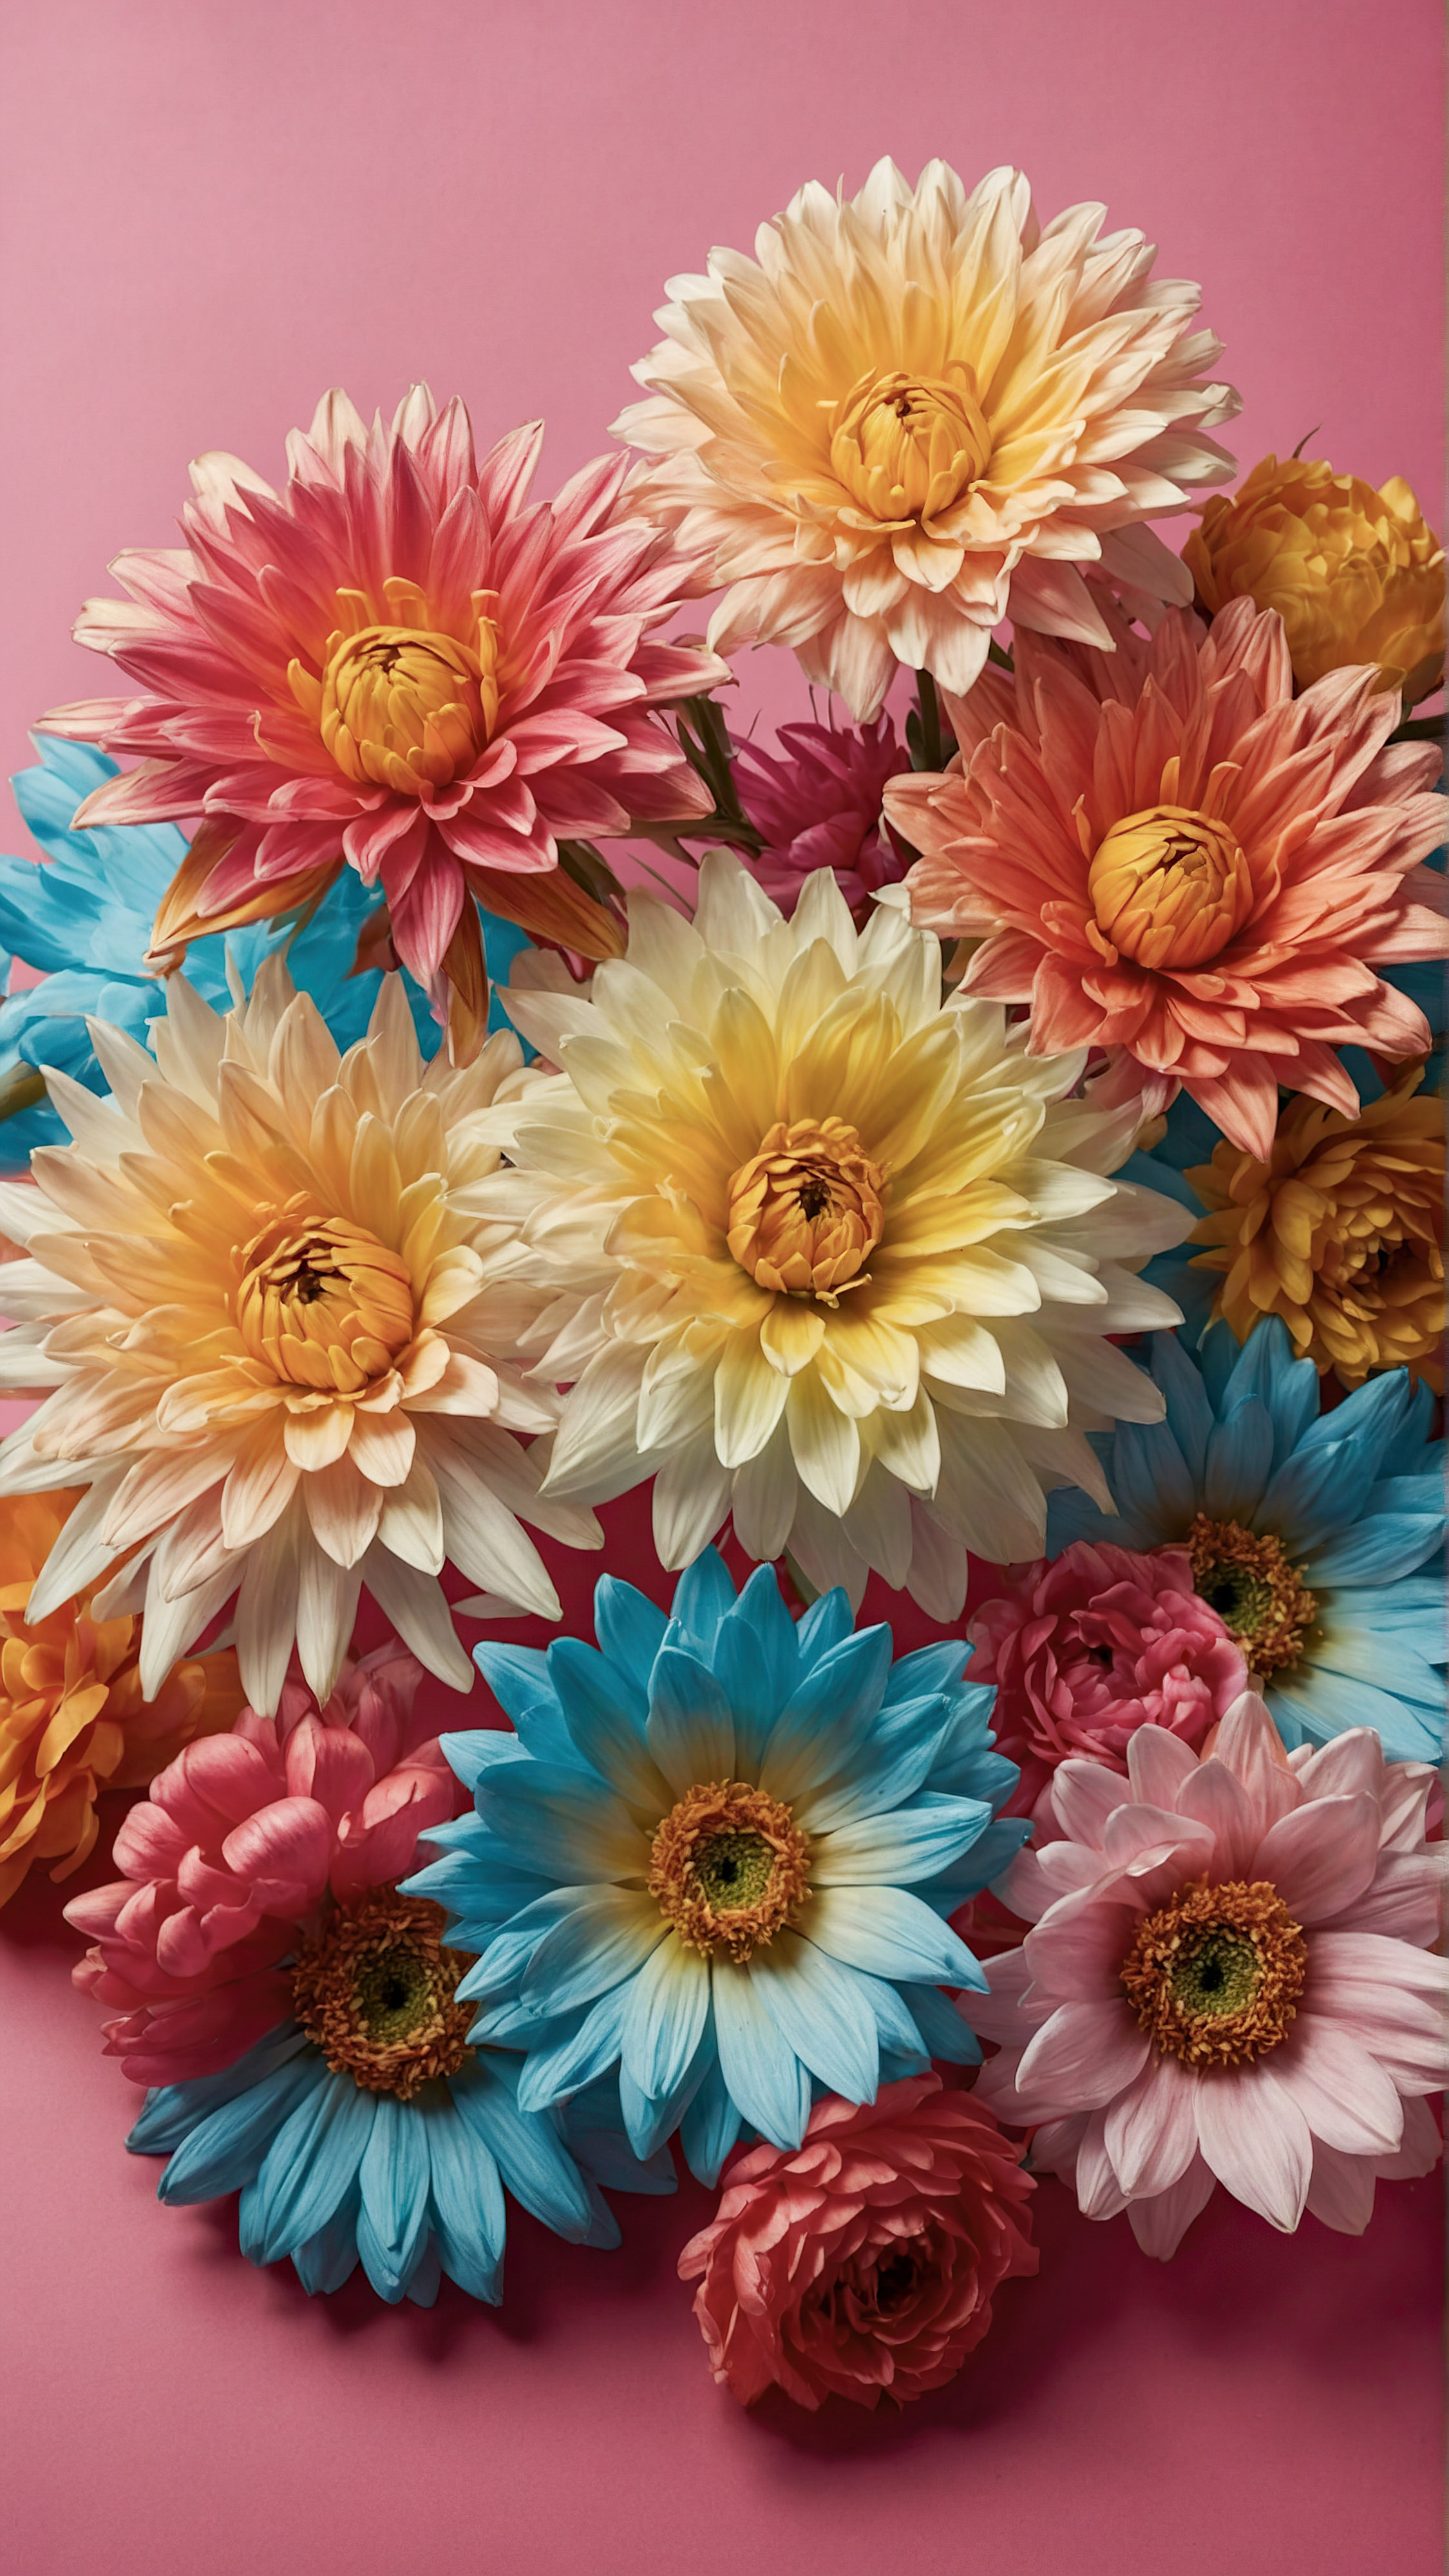 Enjoy the beauty and style of our beautiful iPhone wallpaper, featuring a collection of vibrant, artificial flowers with detailed petals and centers, set against a contrasting pink background.